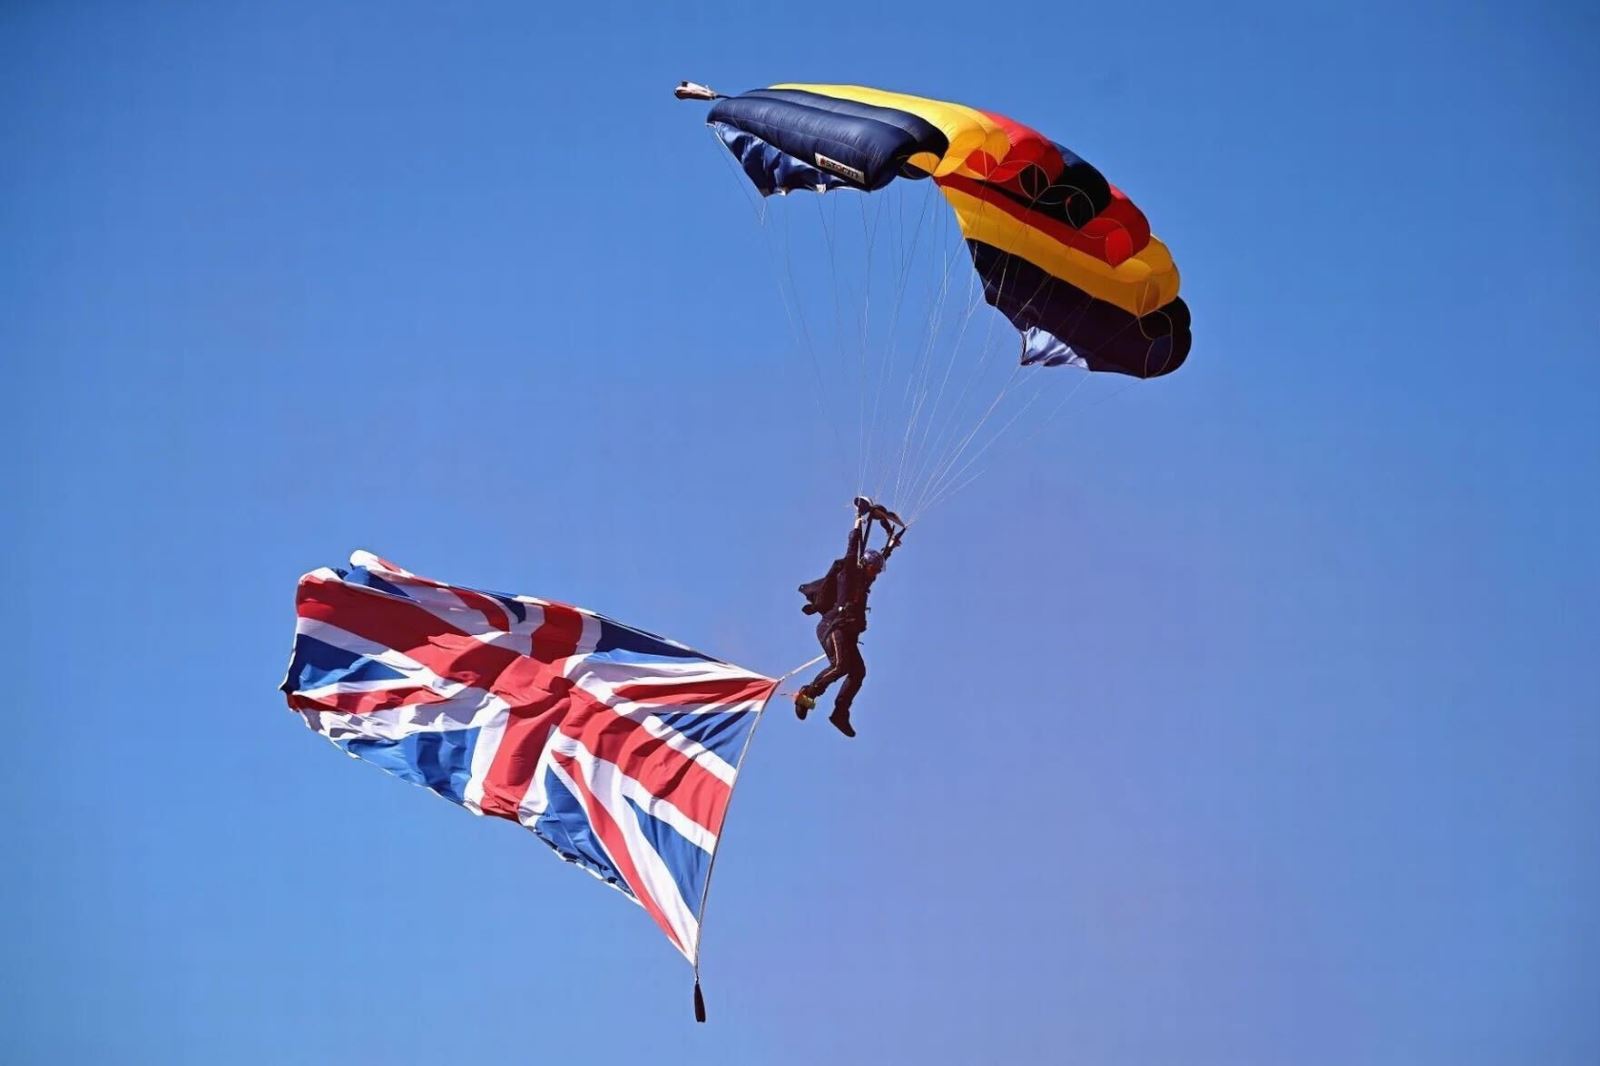 Photograph of a person parachuting with a Union Flag billowing below them